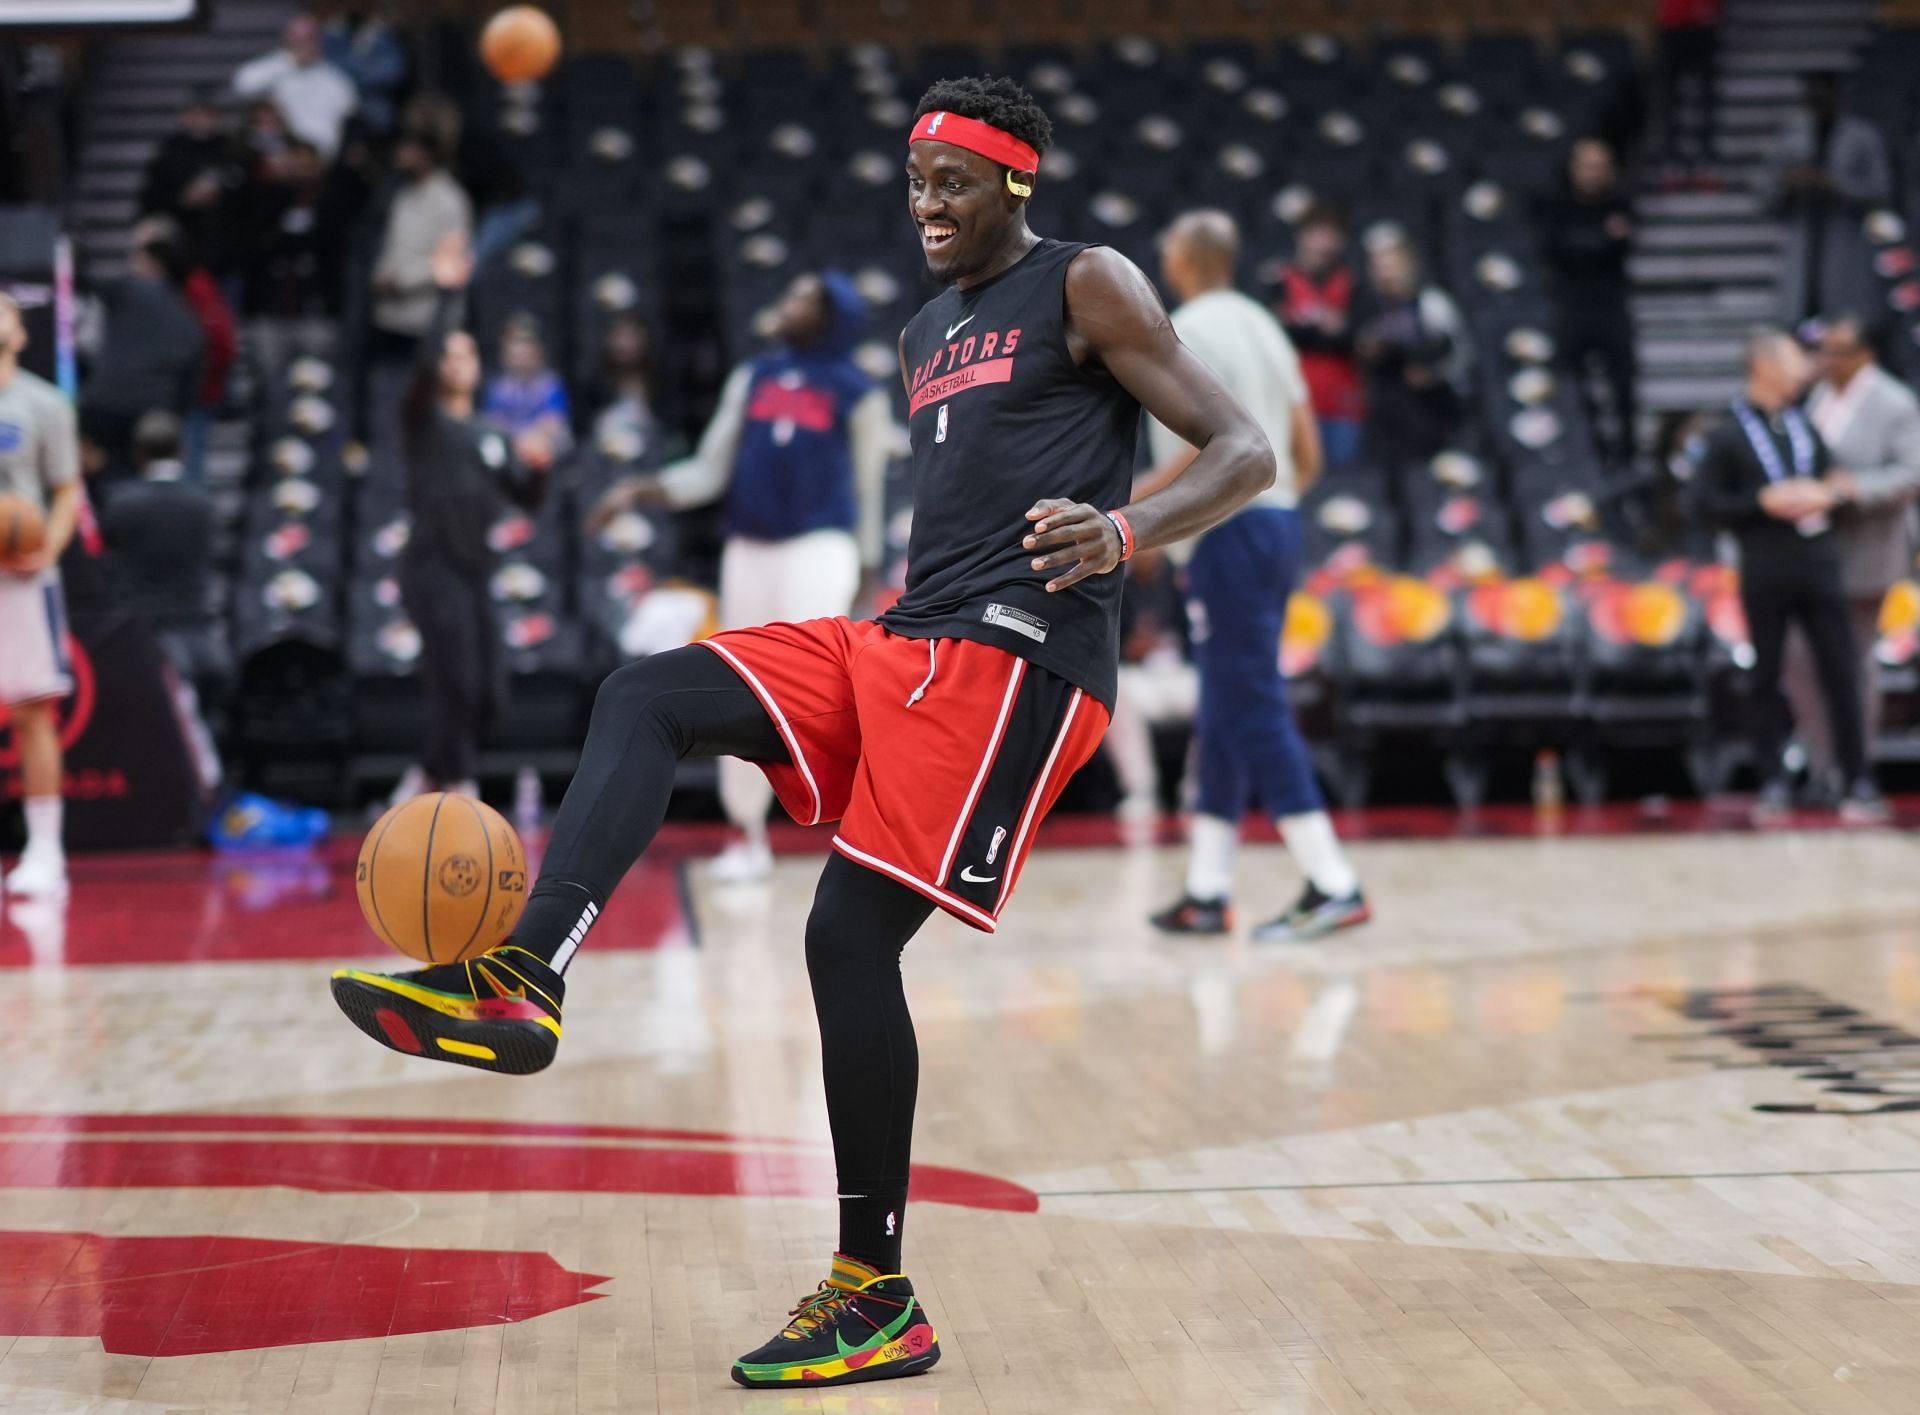 Former NBA All-Star Pascal Siakam of the Toronto Raptors will be out for at least two weeks.